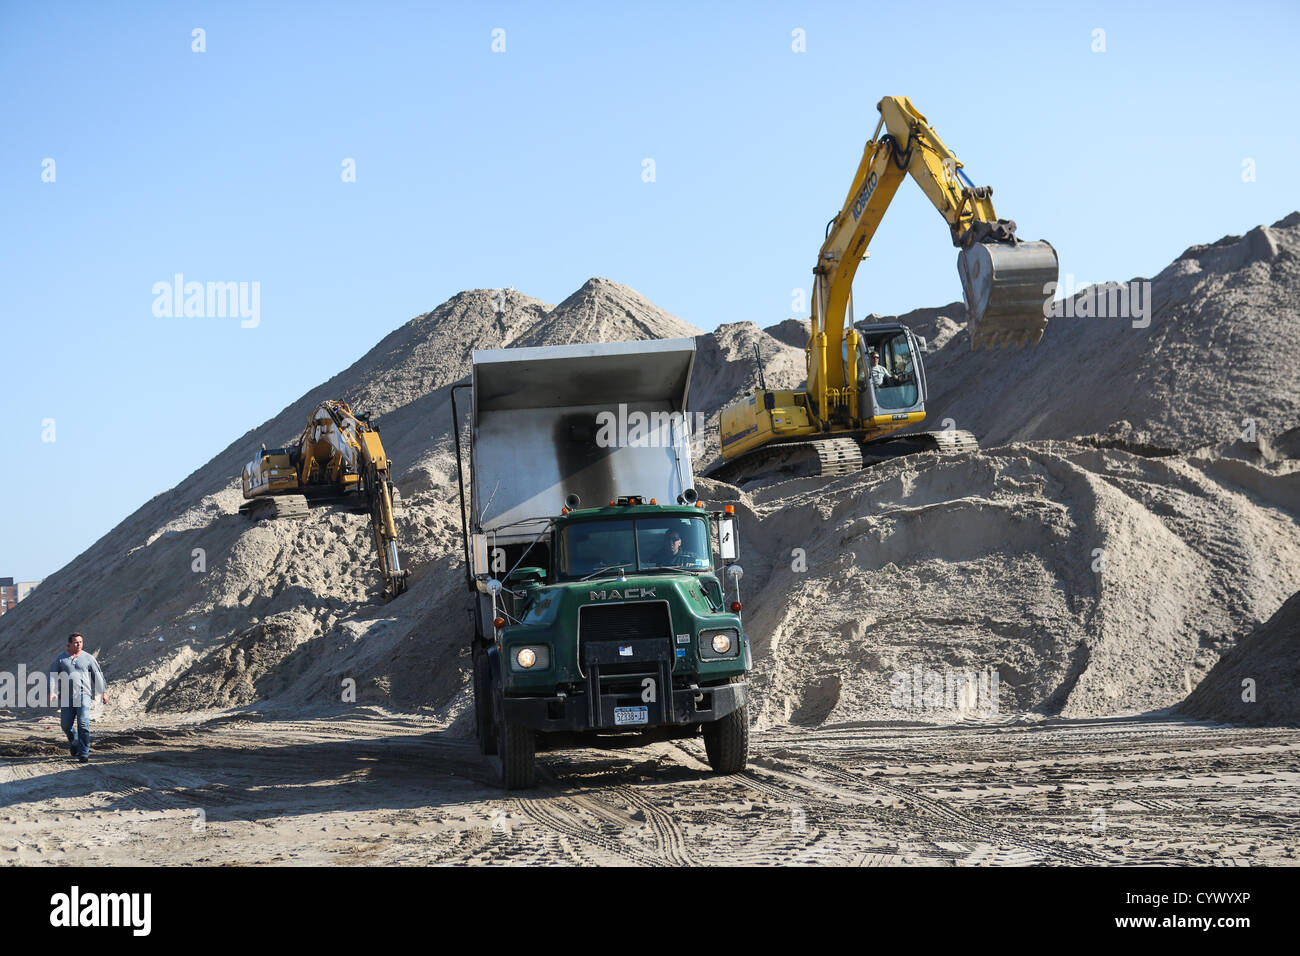 Nov. 11, 2012 - Long Beach, New York - A multiple story mountain of sand gathered from the clean up of Long Beach, New York after Hurricane Sandy is seen on Sunday, November 11, 2012. (Credit Image: © Nicolaus Czarnecki/ZUMAPRESS.com) Stock Photo